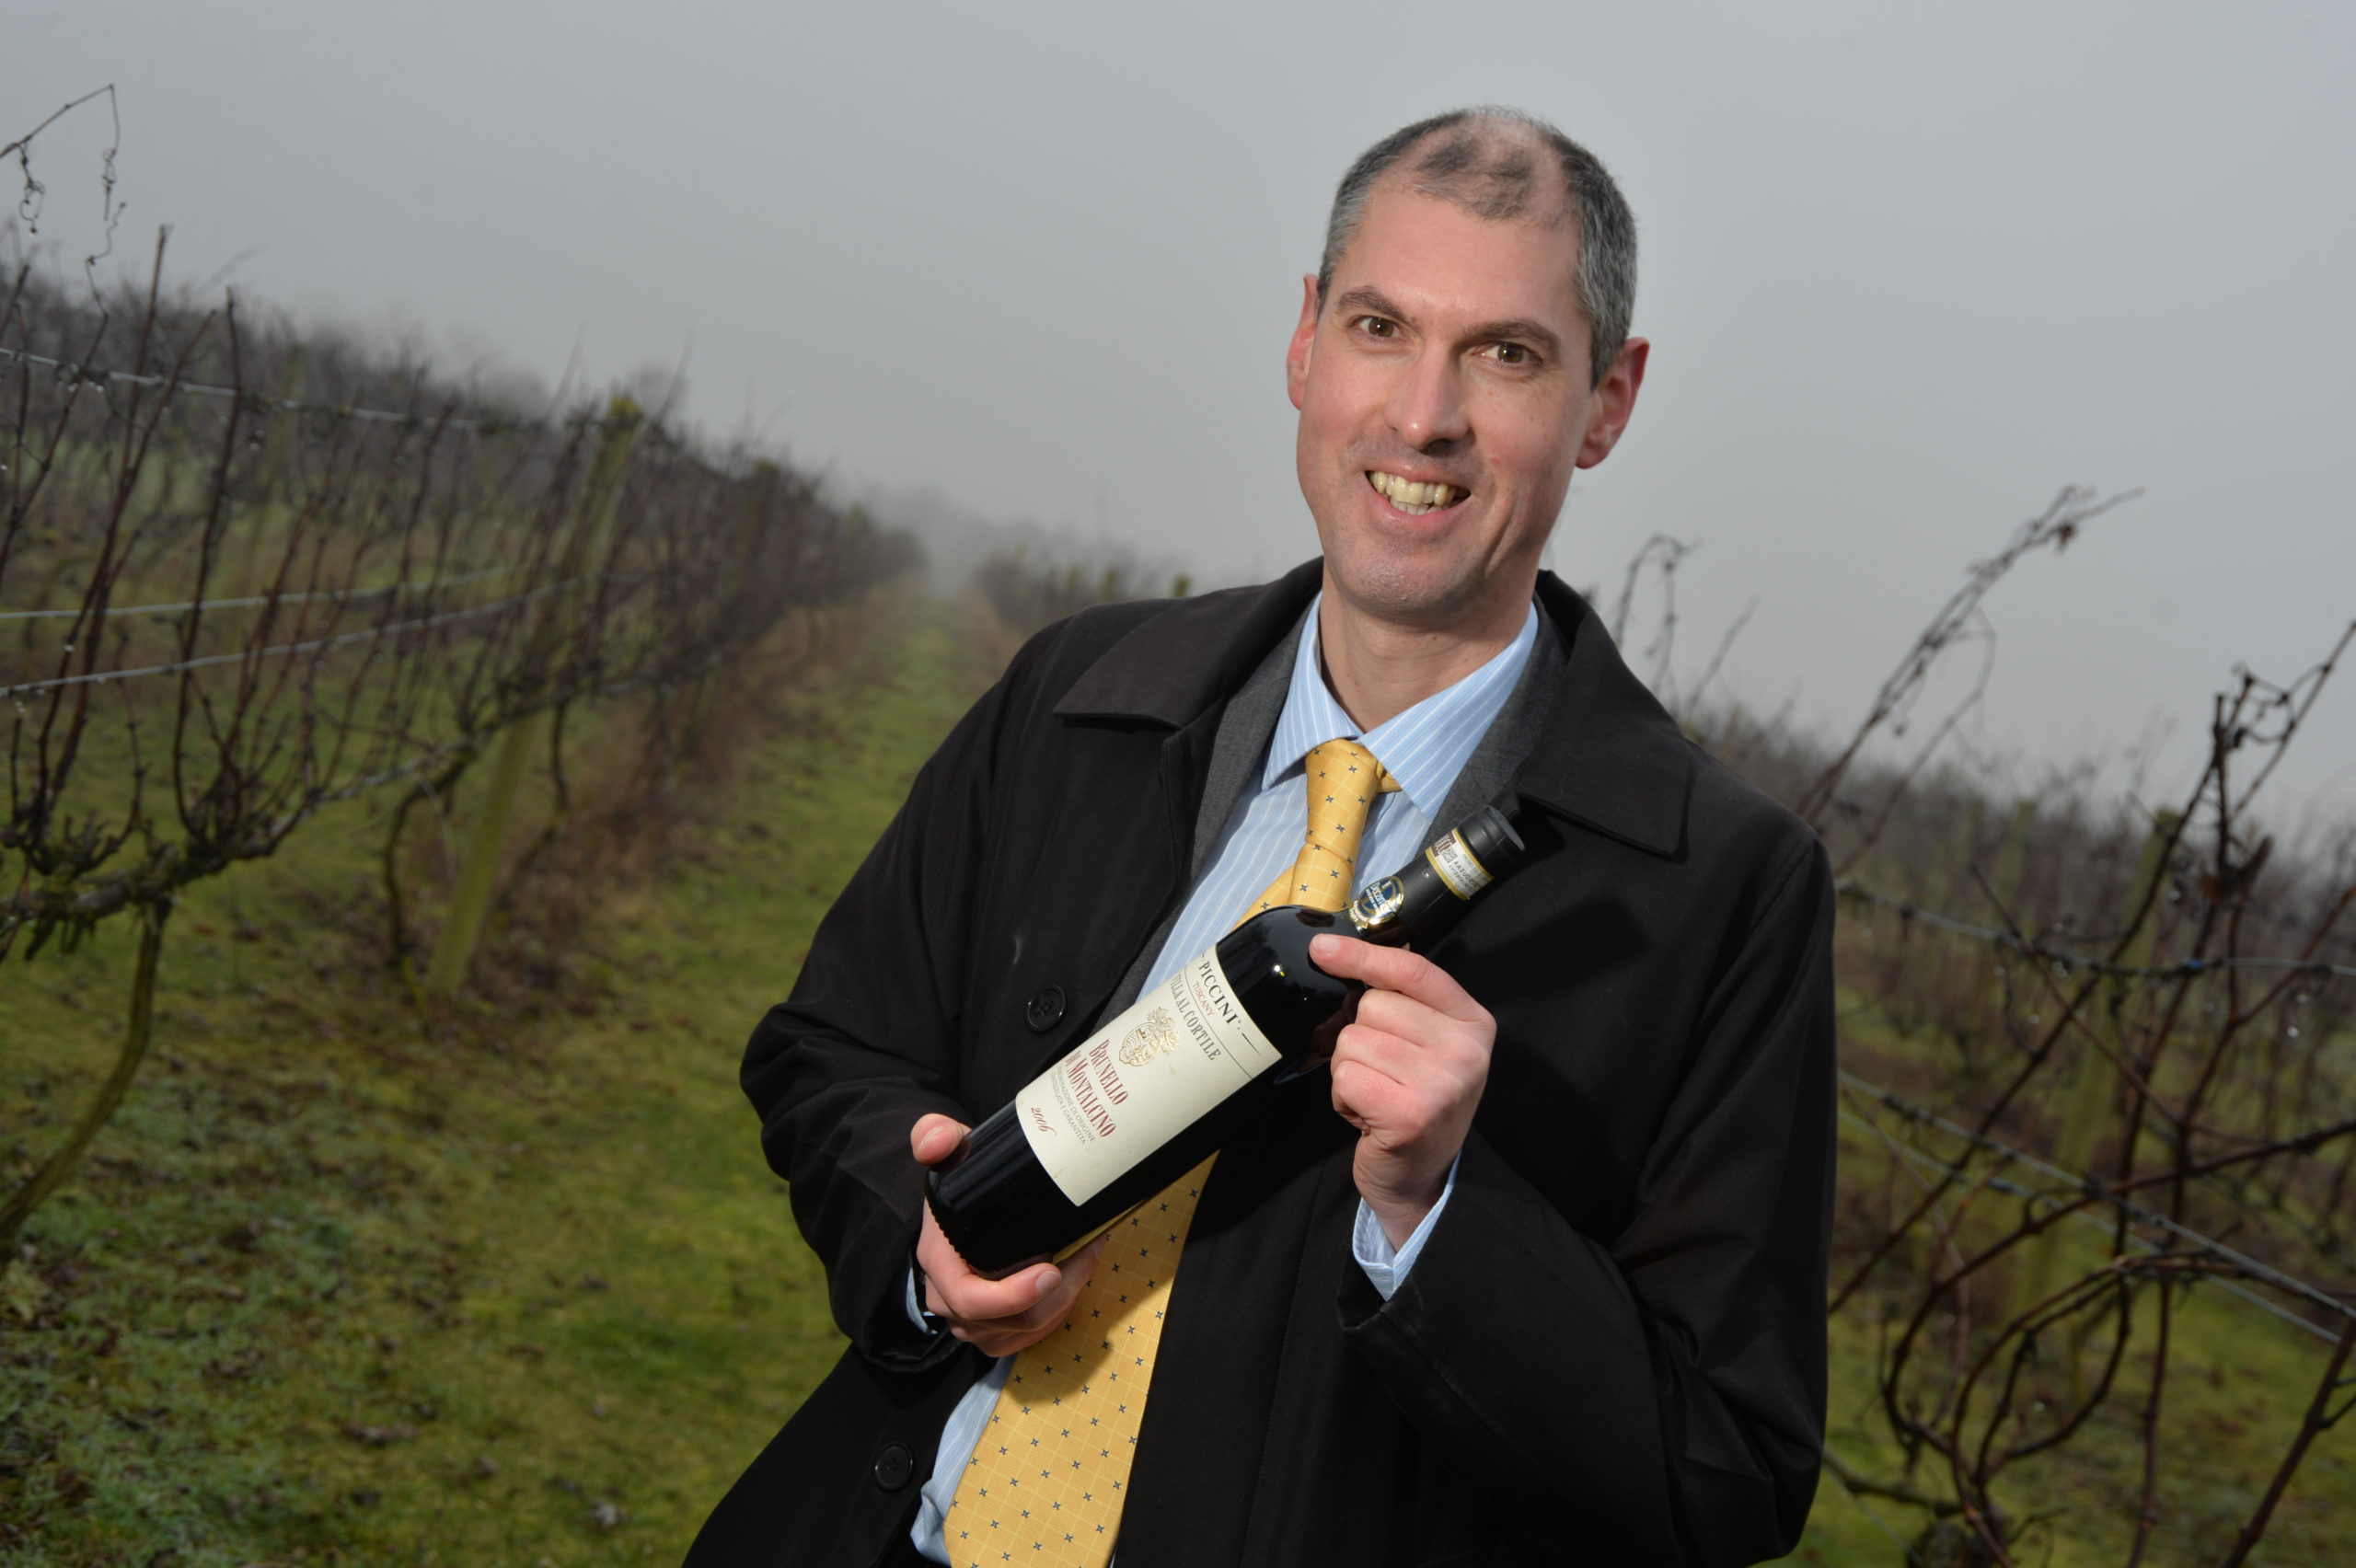 A picture of Simon Wragg, at a vinyard with a bottle of wine